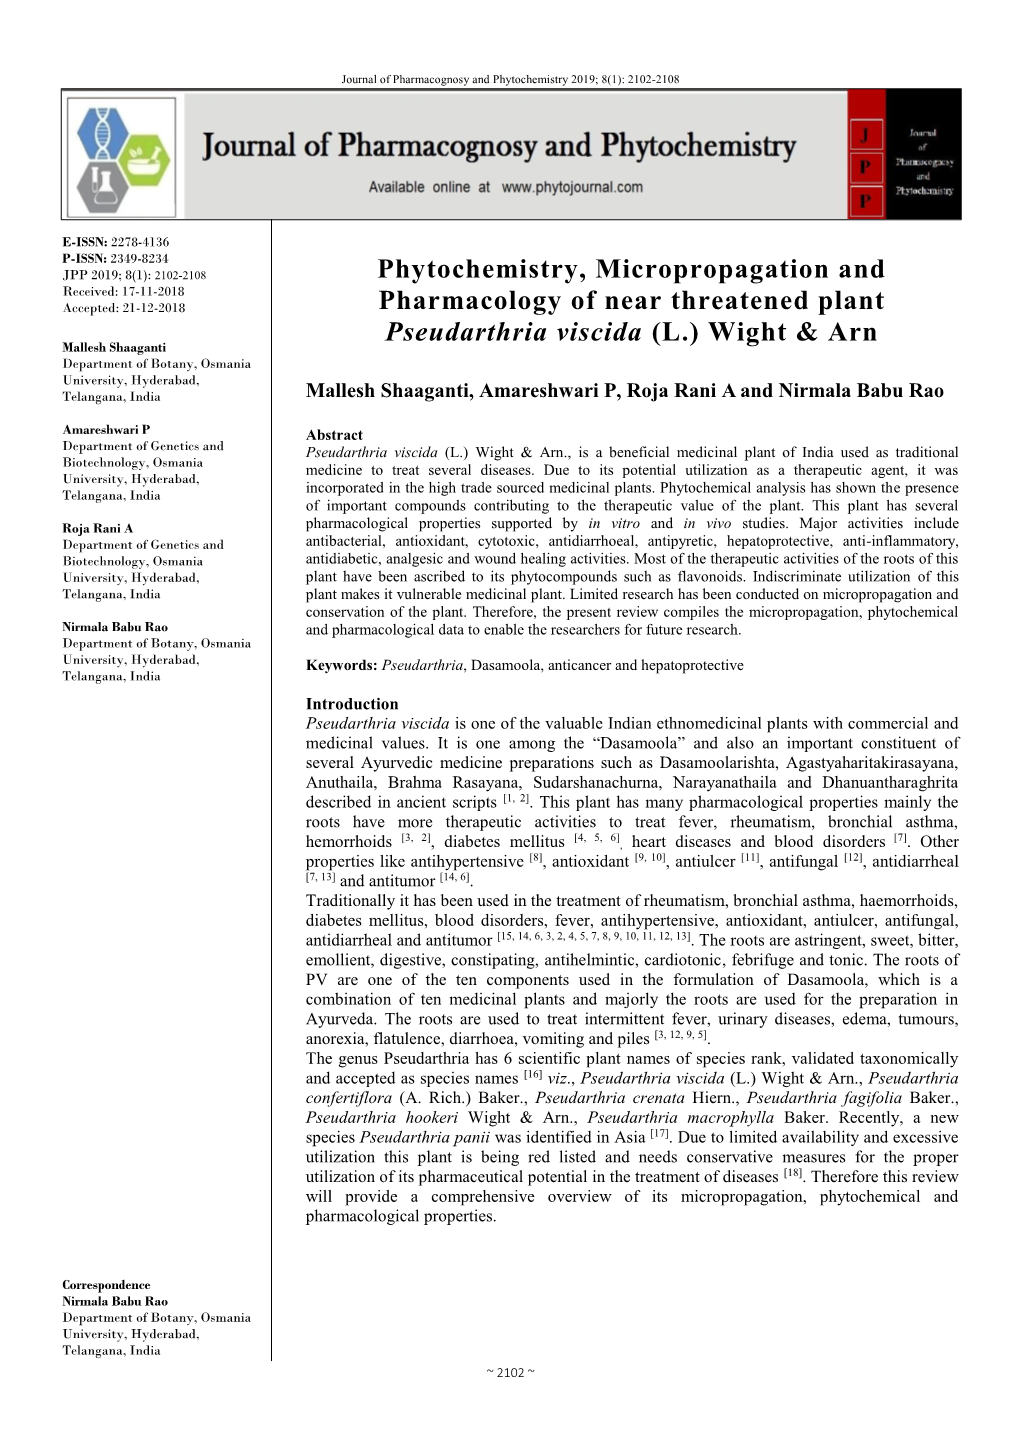 Phytochemistry, Micropropagation and Pharmacology of Near Threatened